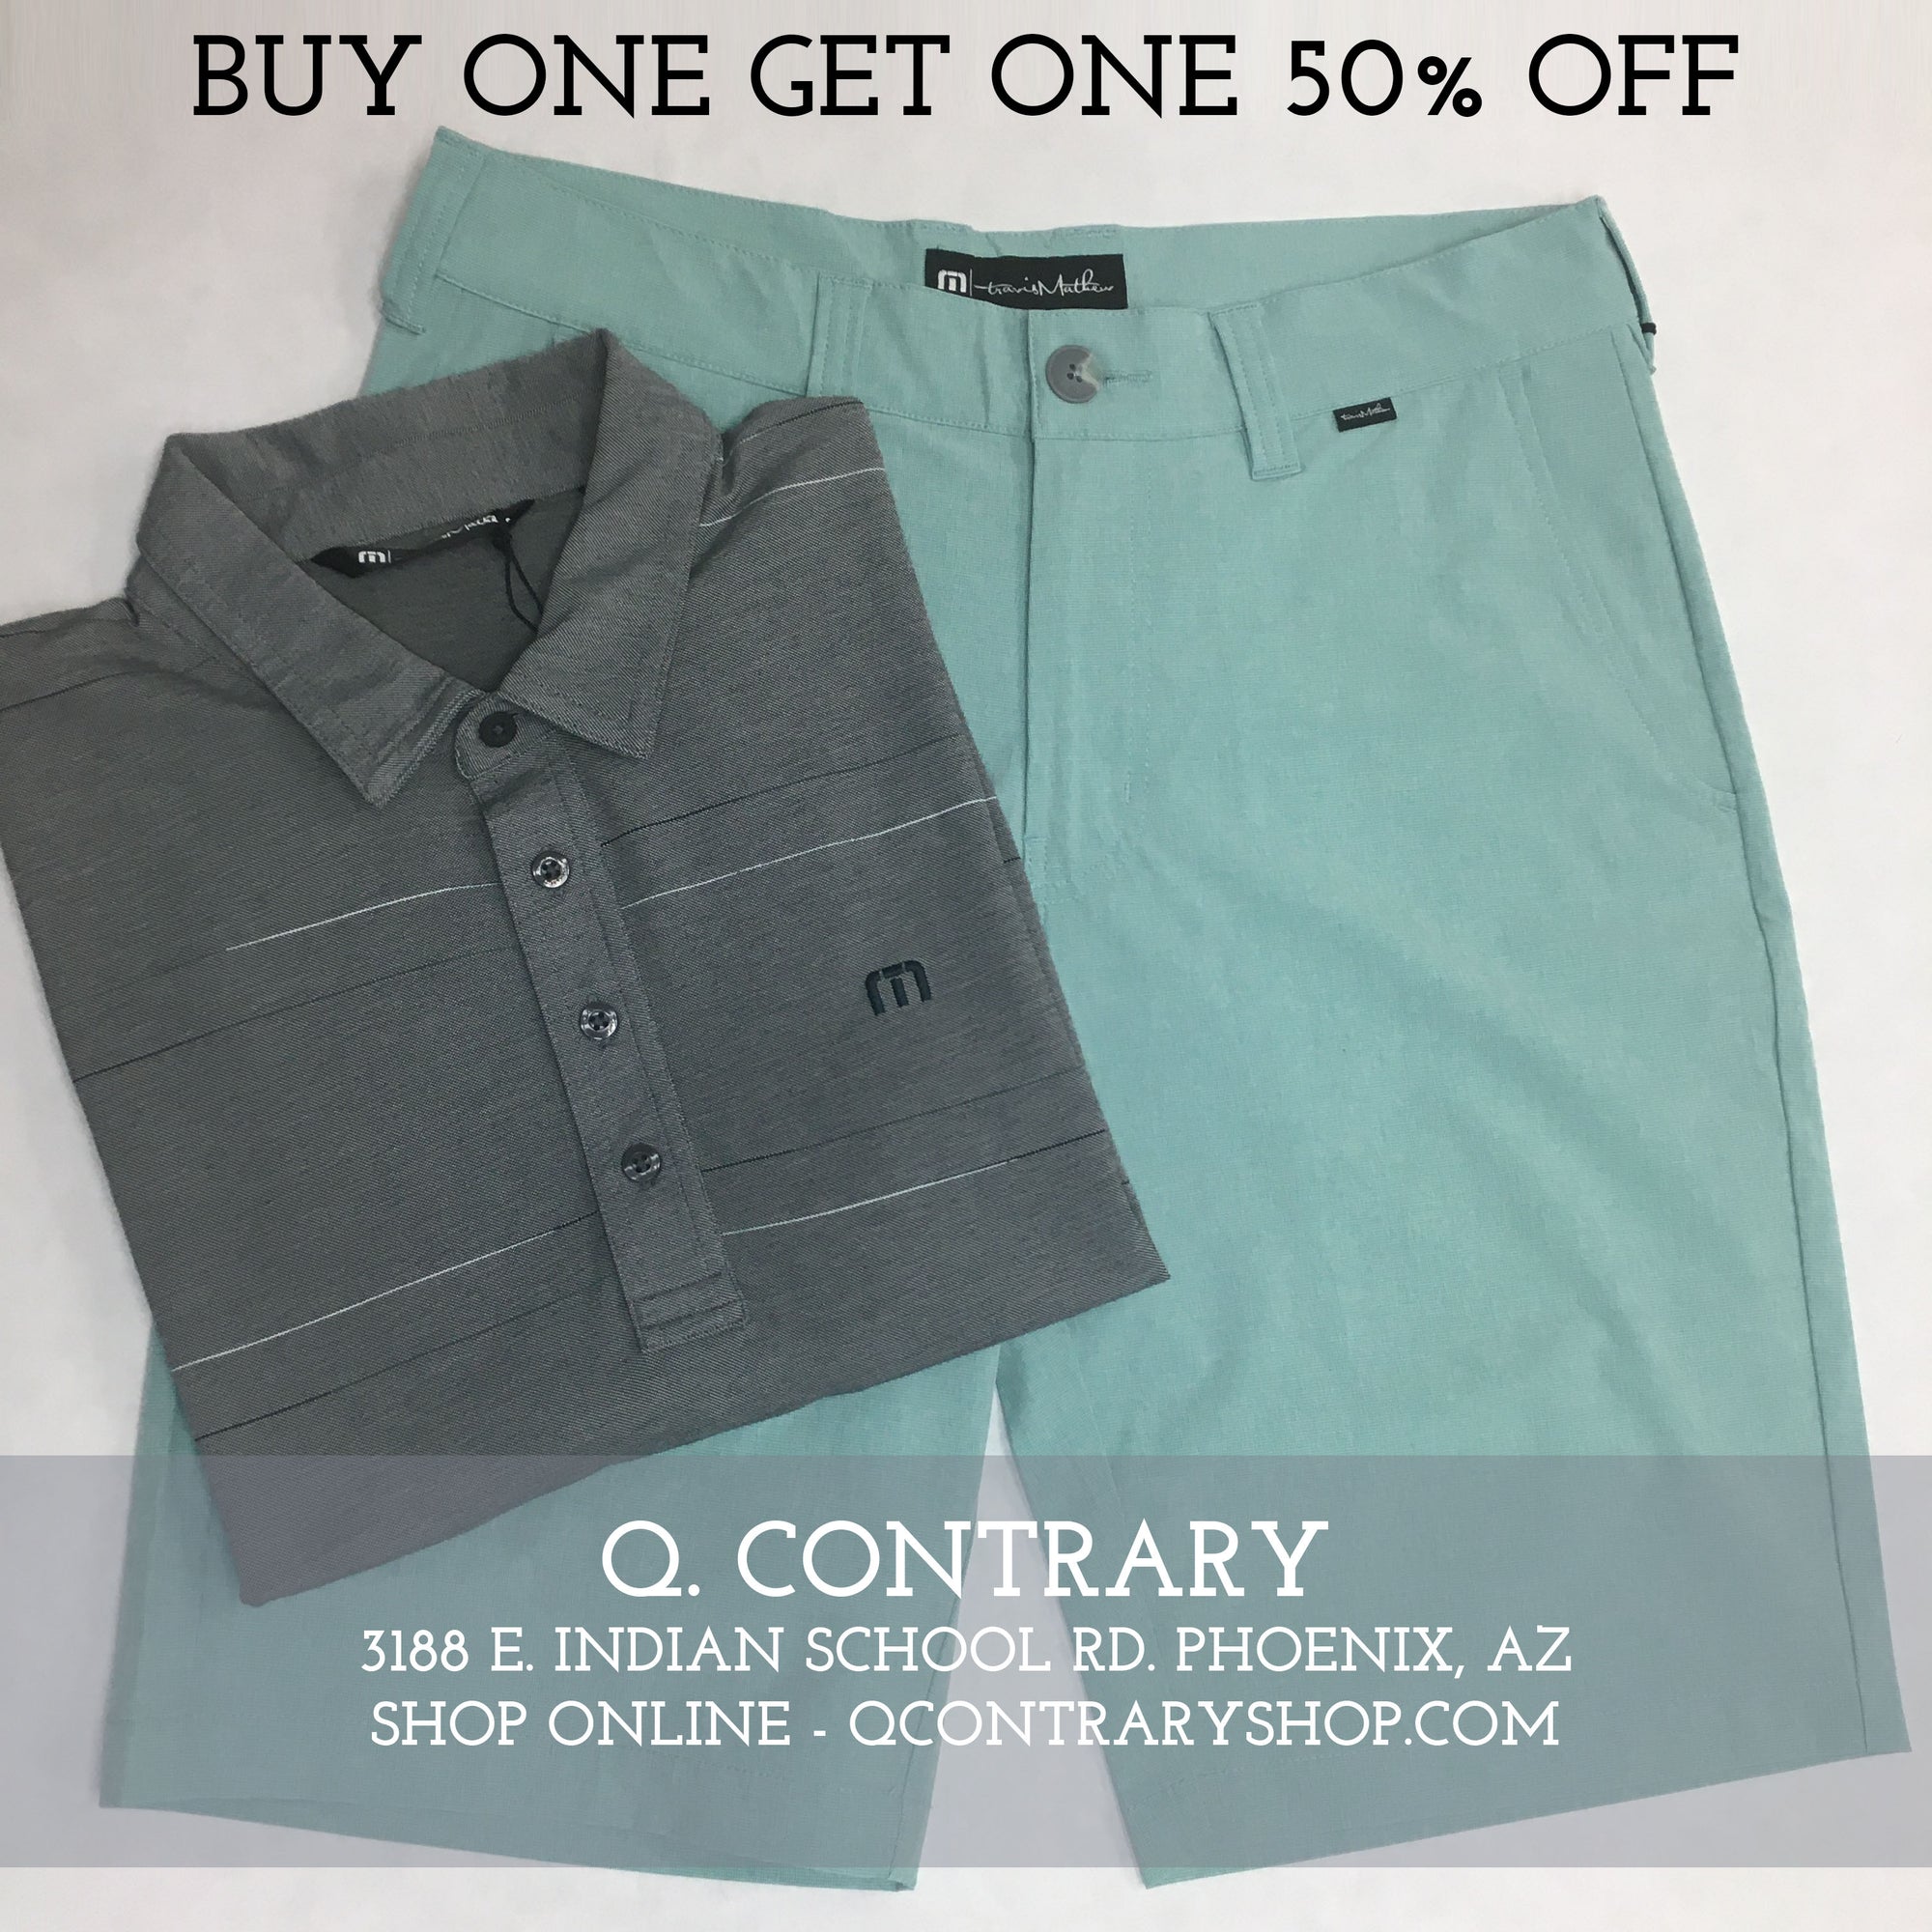 Buy One Get One 50% Off